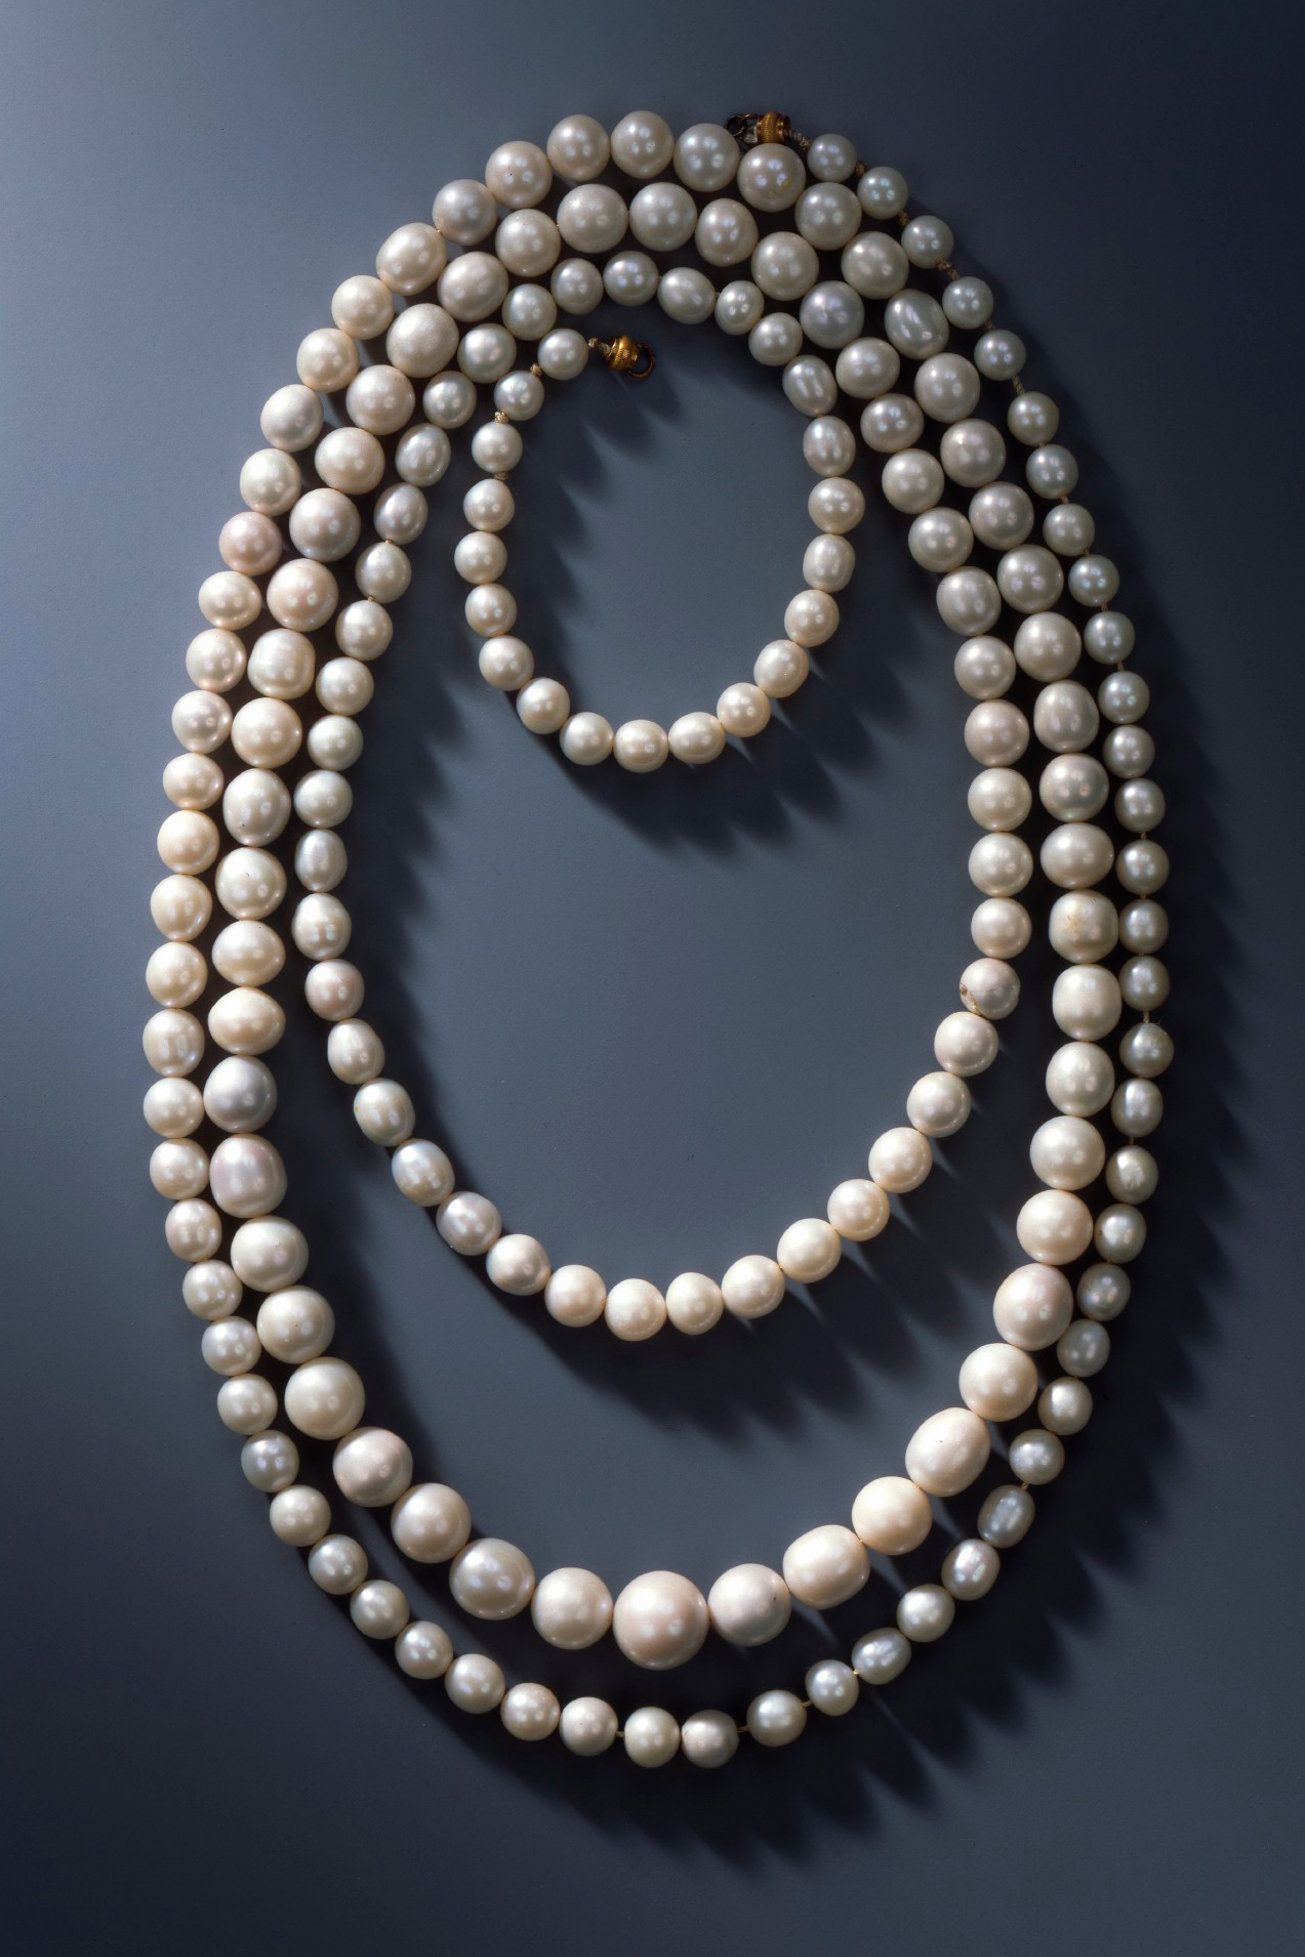 A chain of 177 Saxon pearls from the 18th century. They were stolen from Dresden’s Green Vault in 2019. Six men were charged in the theft, but the jewelry is still missing.